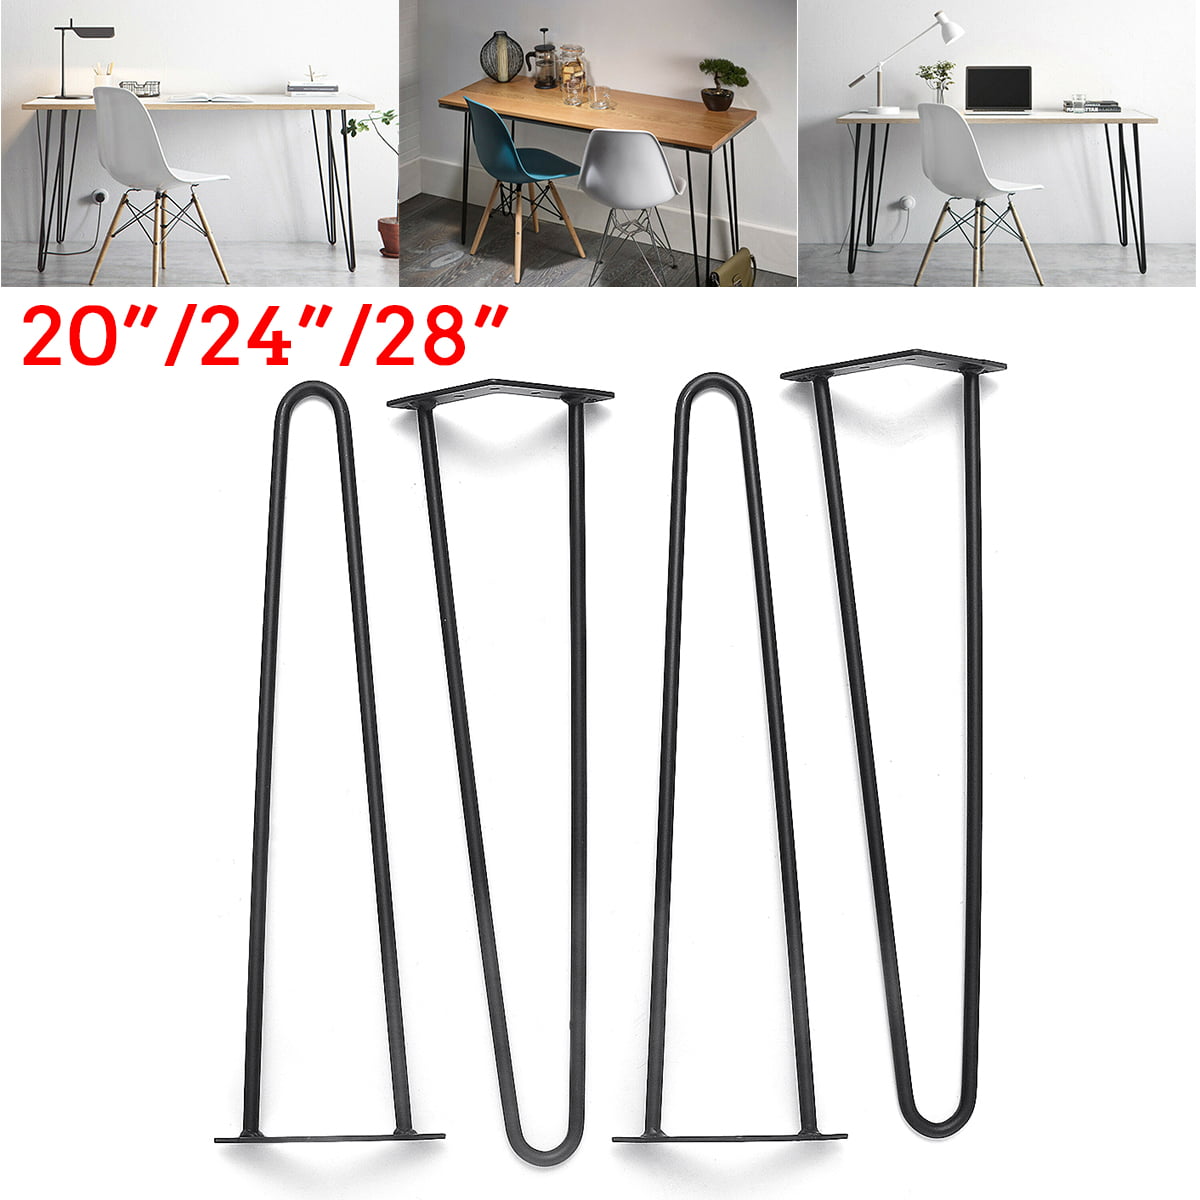 Details about   4X Metal Hairpin Rod Table Desk Iron Legs Heavy Duty Furniture Industrial 8"-28" 